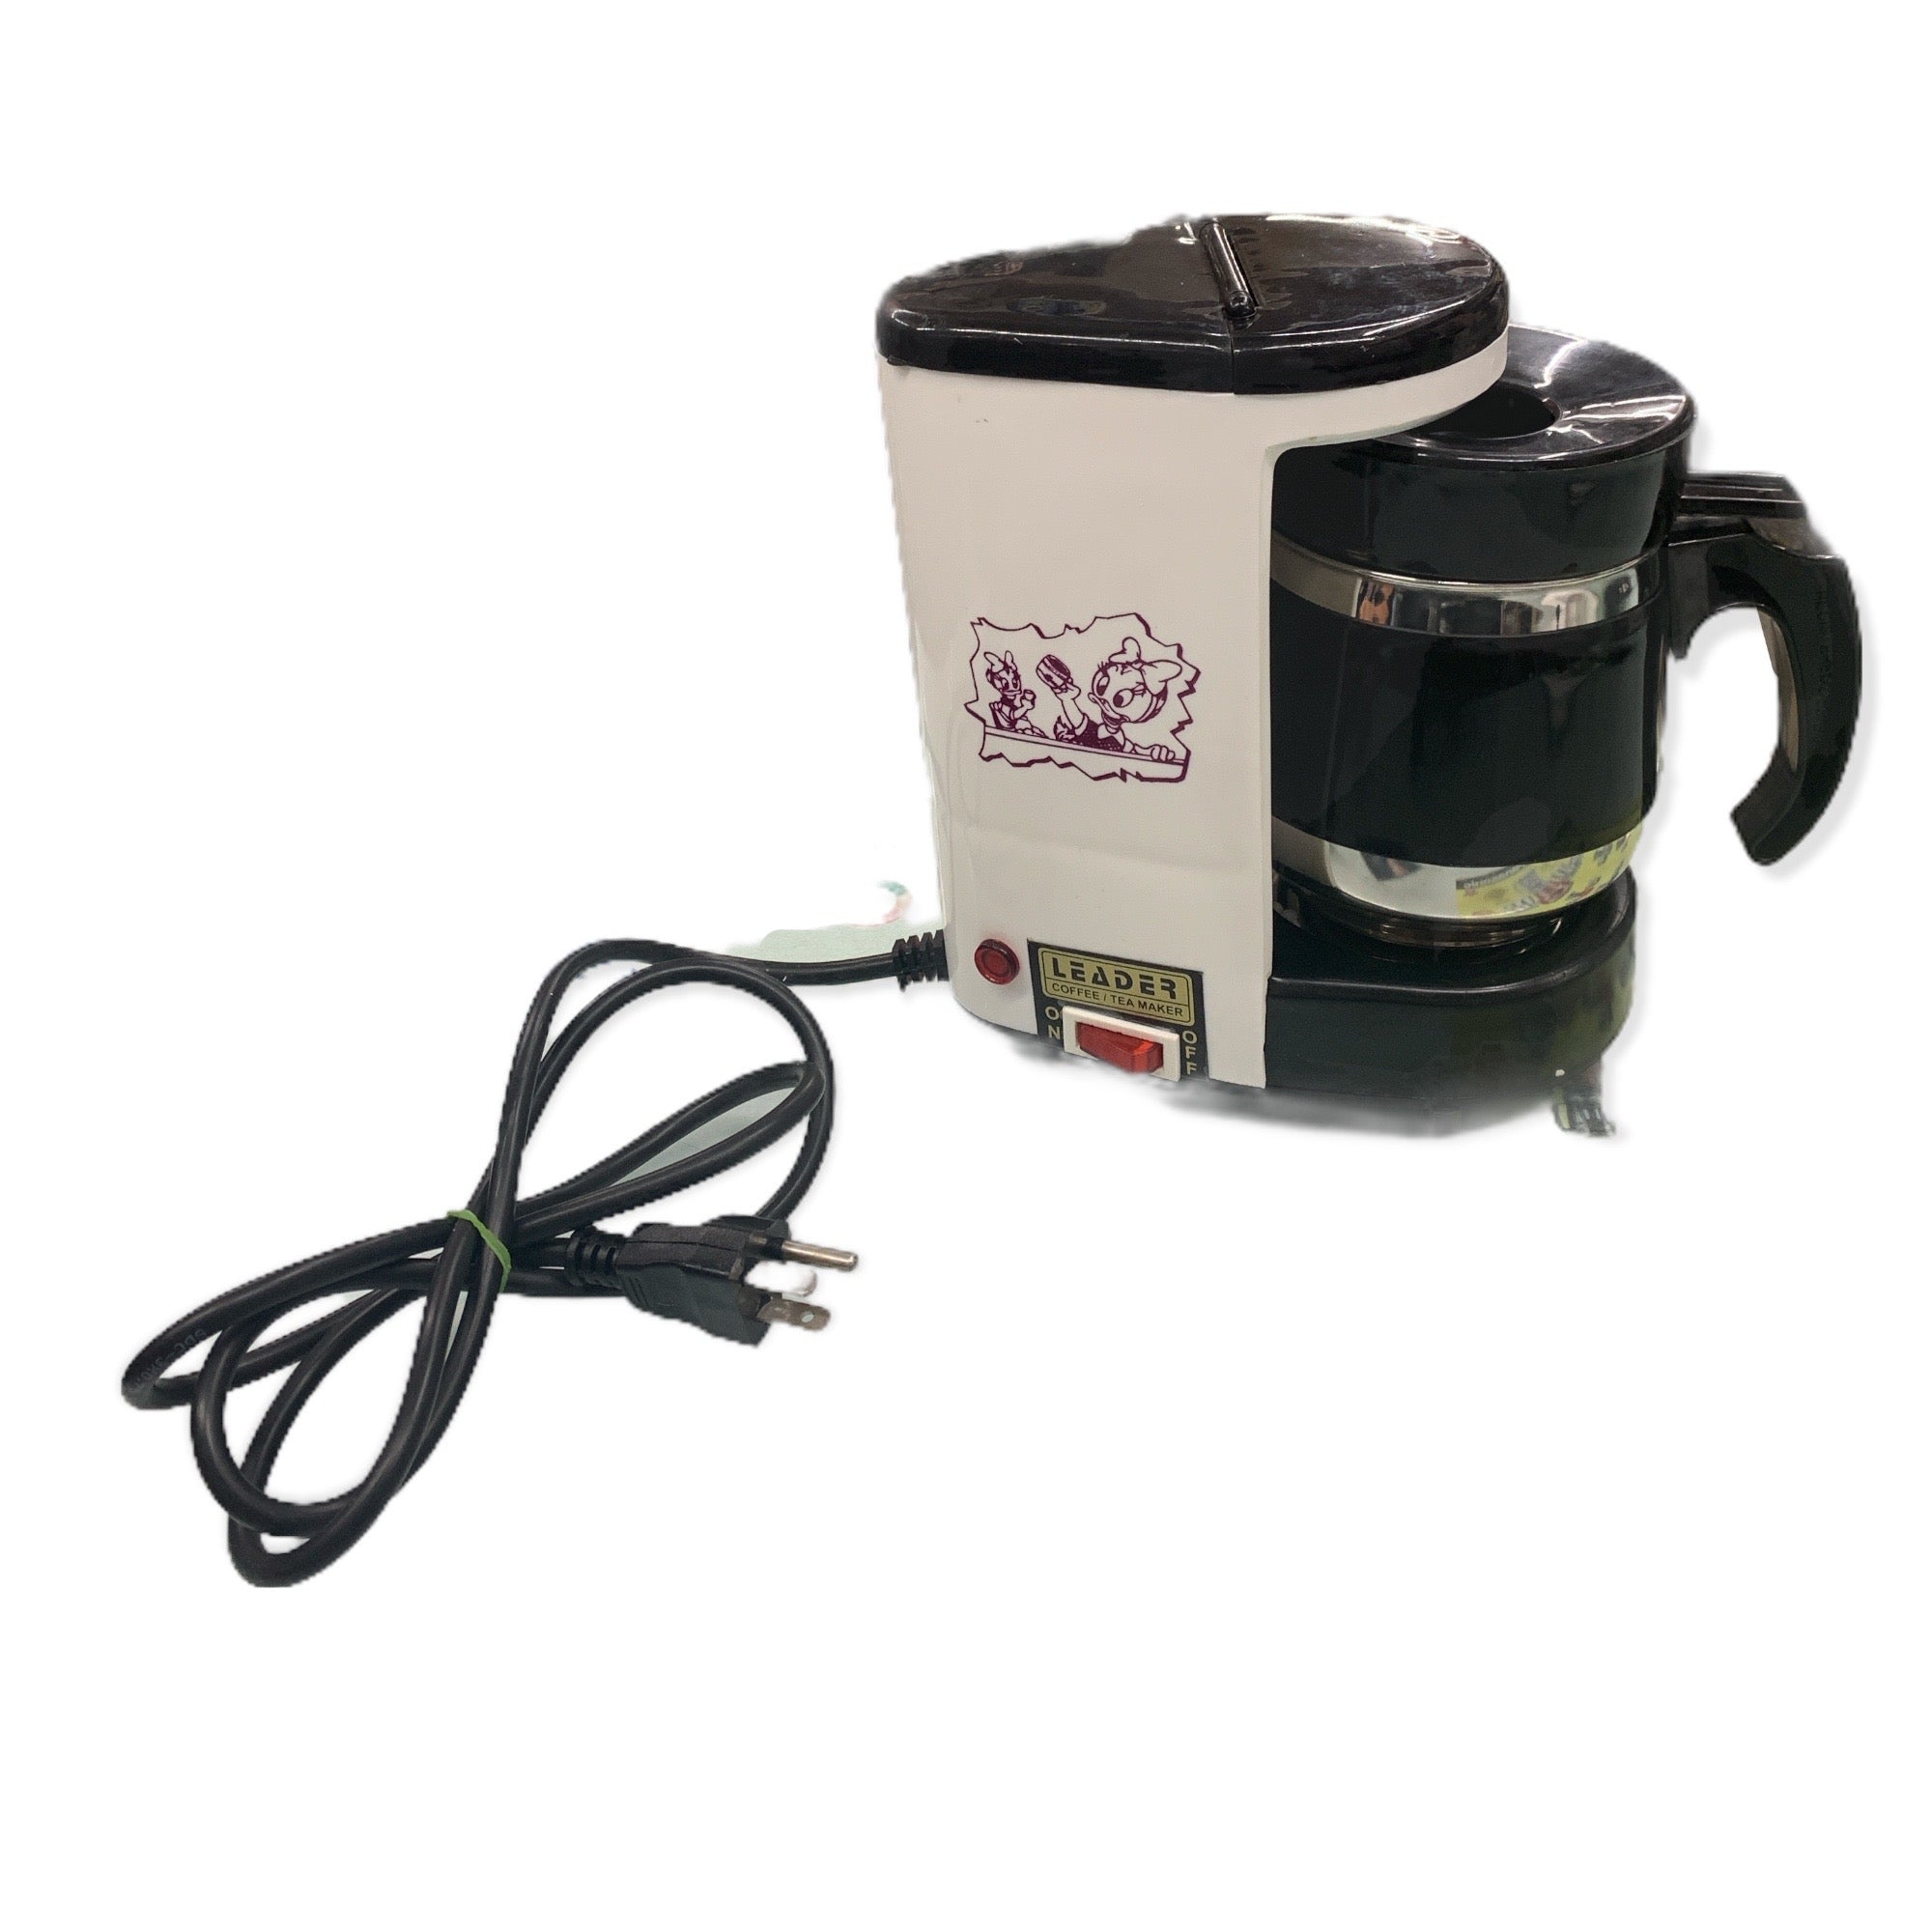 Leader Electric Drip Coffee Maker 110 Volts (For Use in USA and Canada Only)